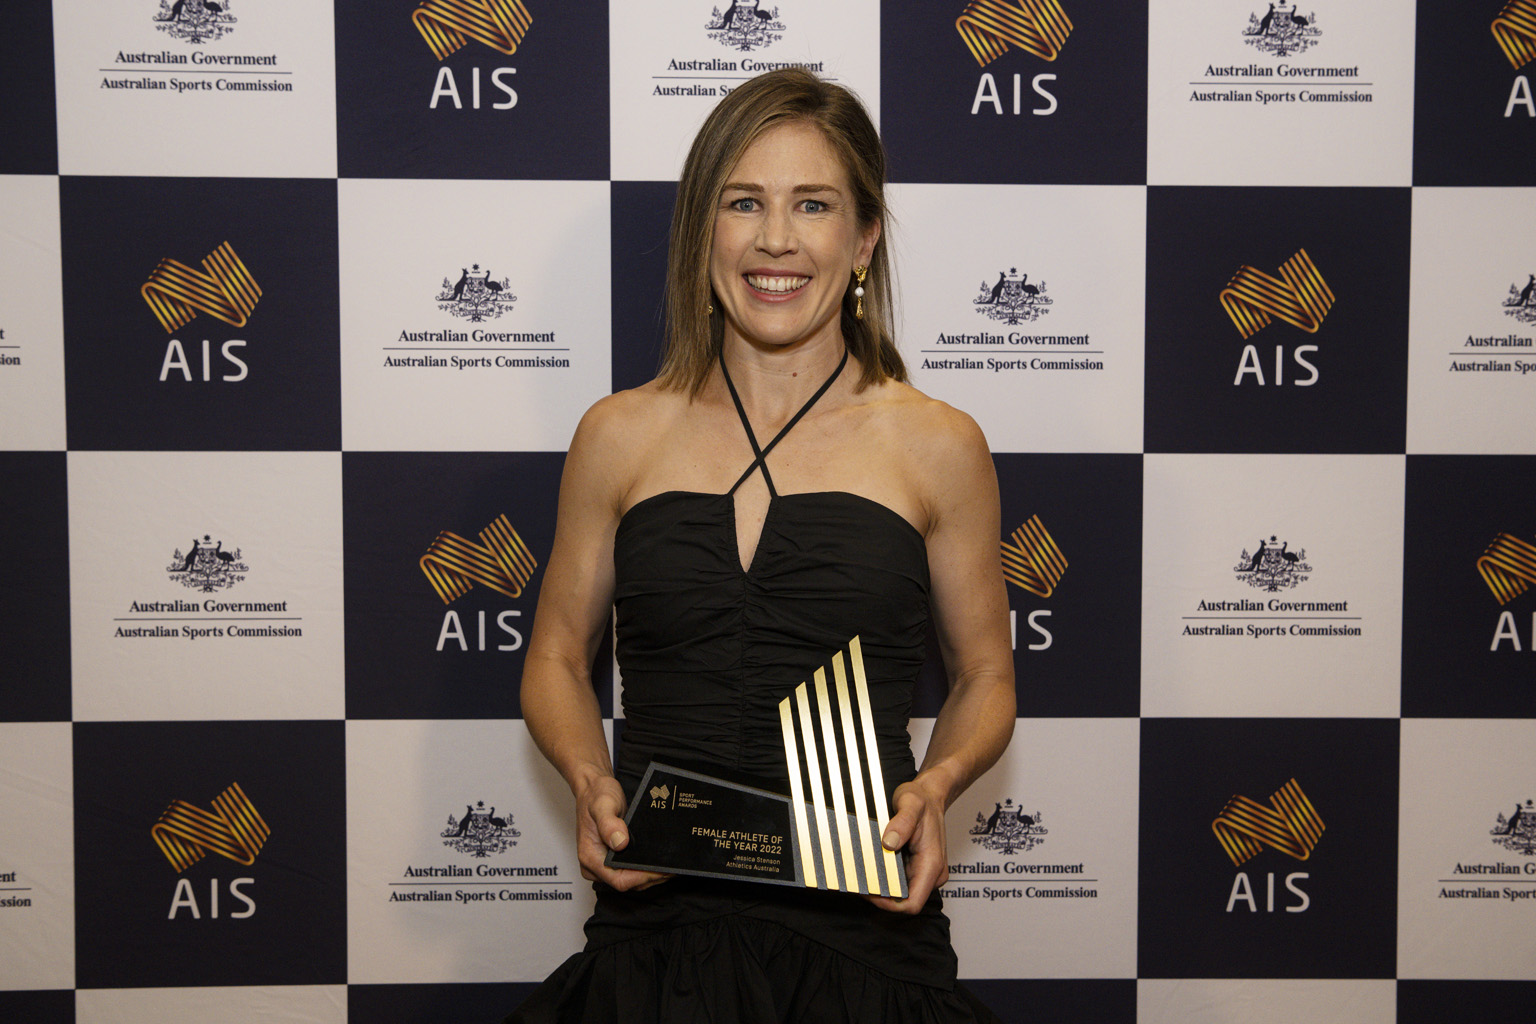 Jessica Stensen stands in front of an AIS and Australian Sports Commission banner with her ASPAs trophy